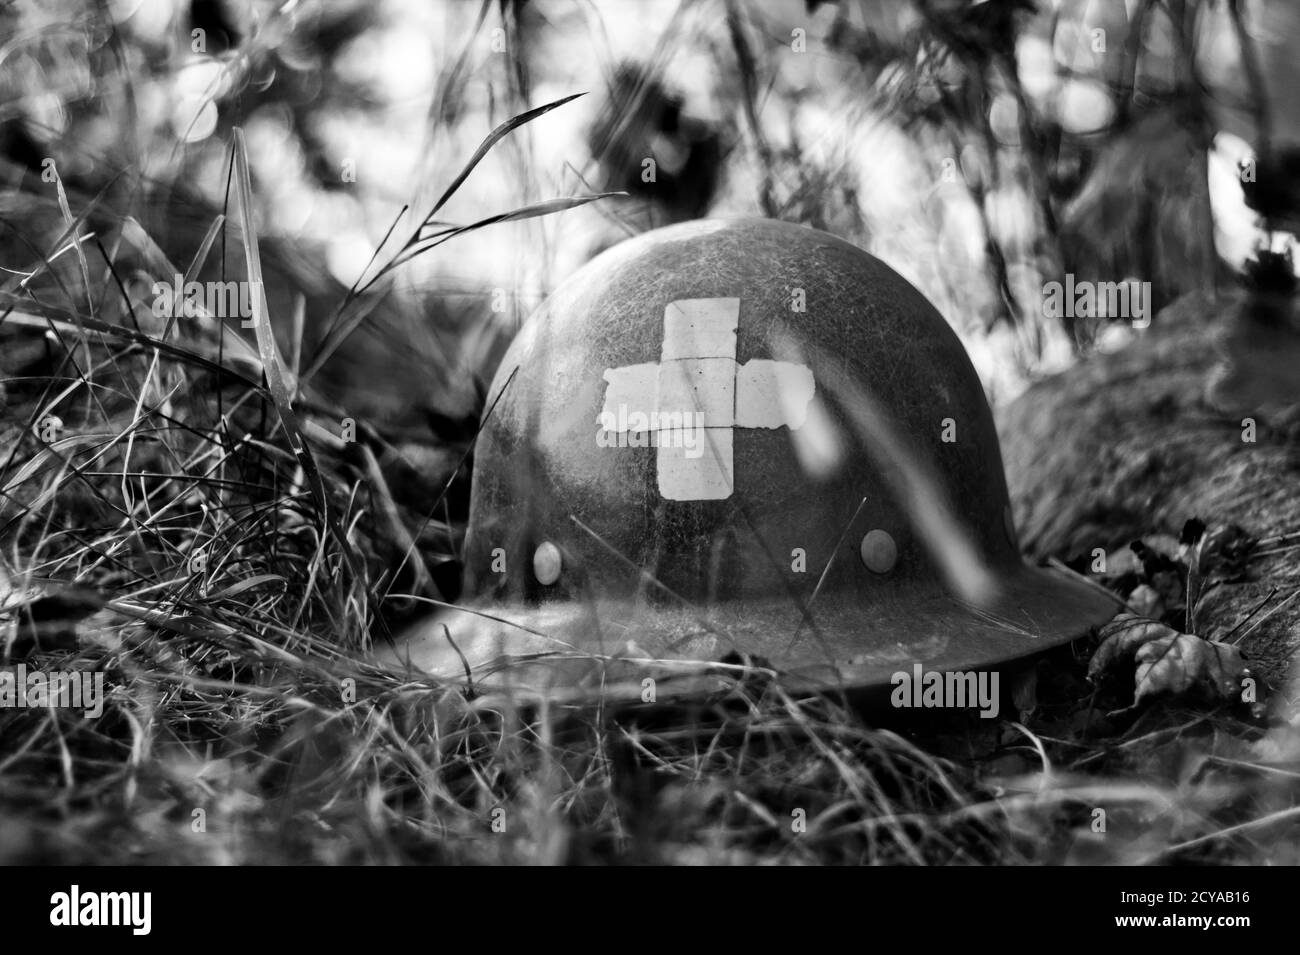 WW2 medic style helmet in the dirt in black and white Stock Photo